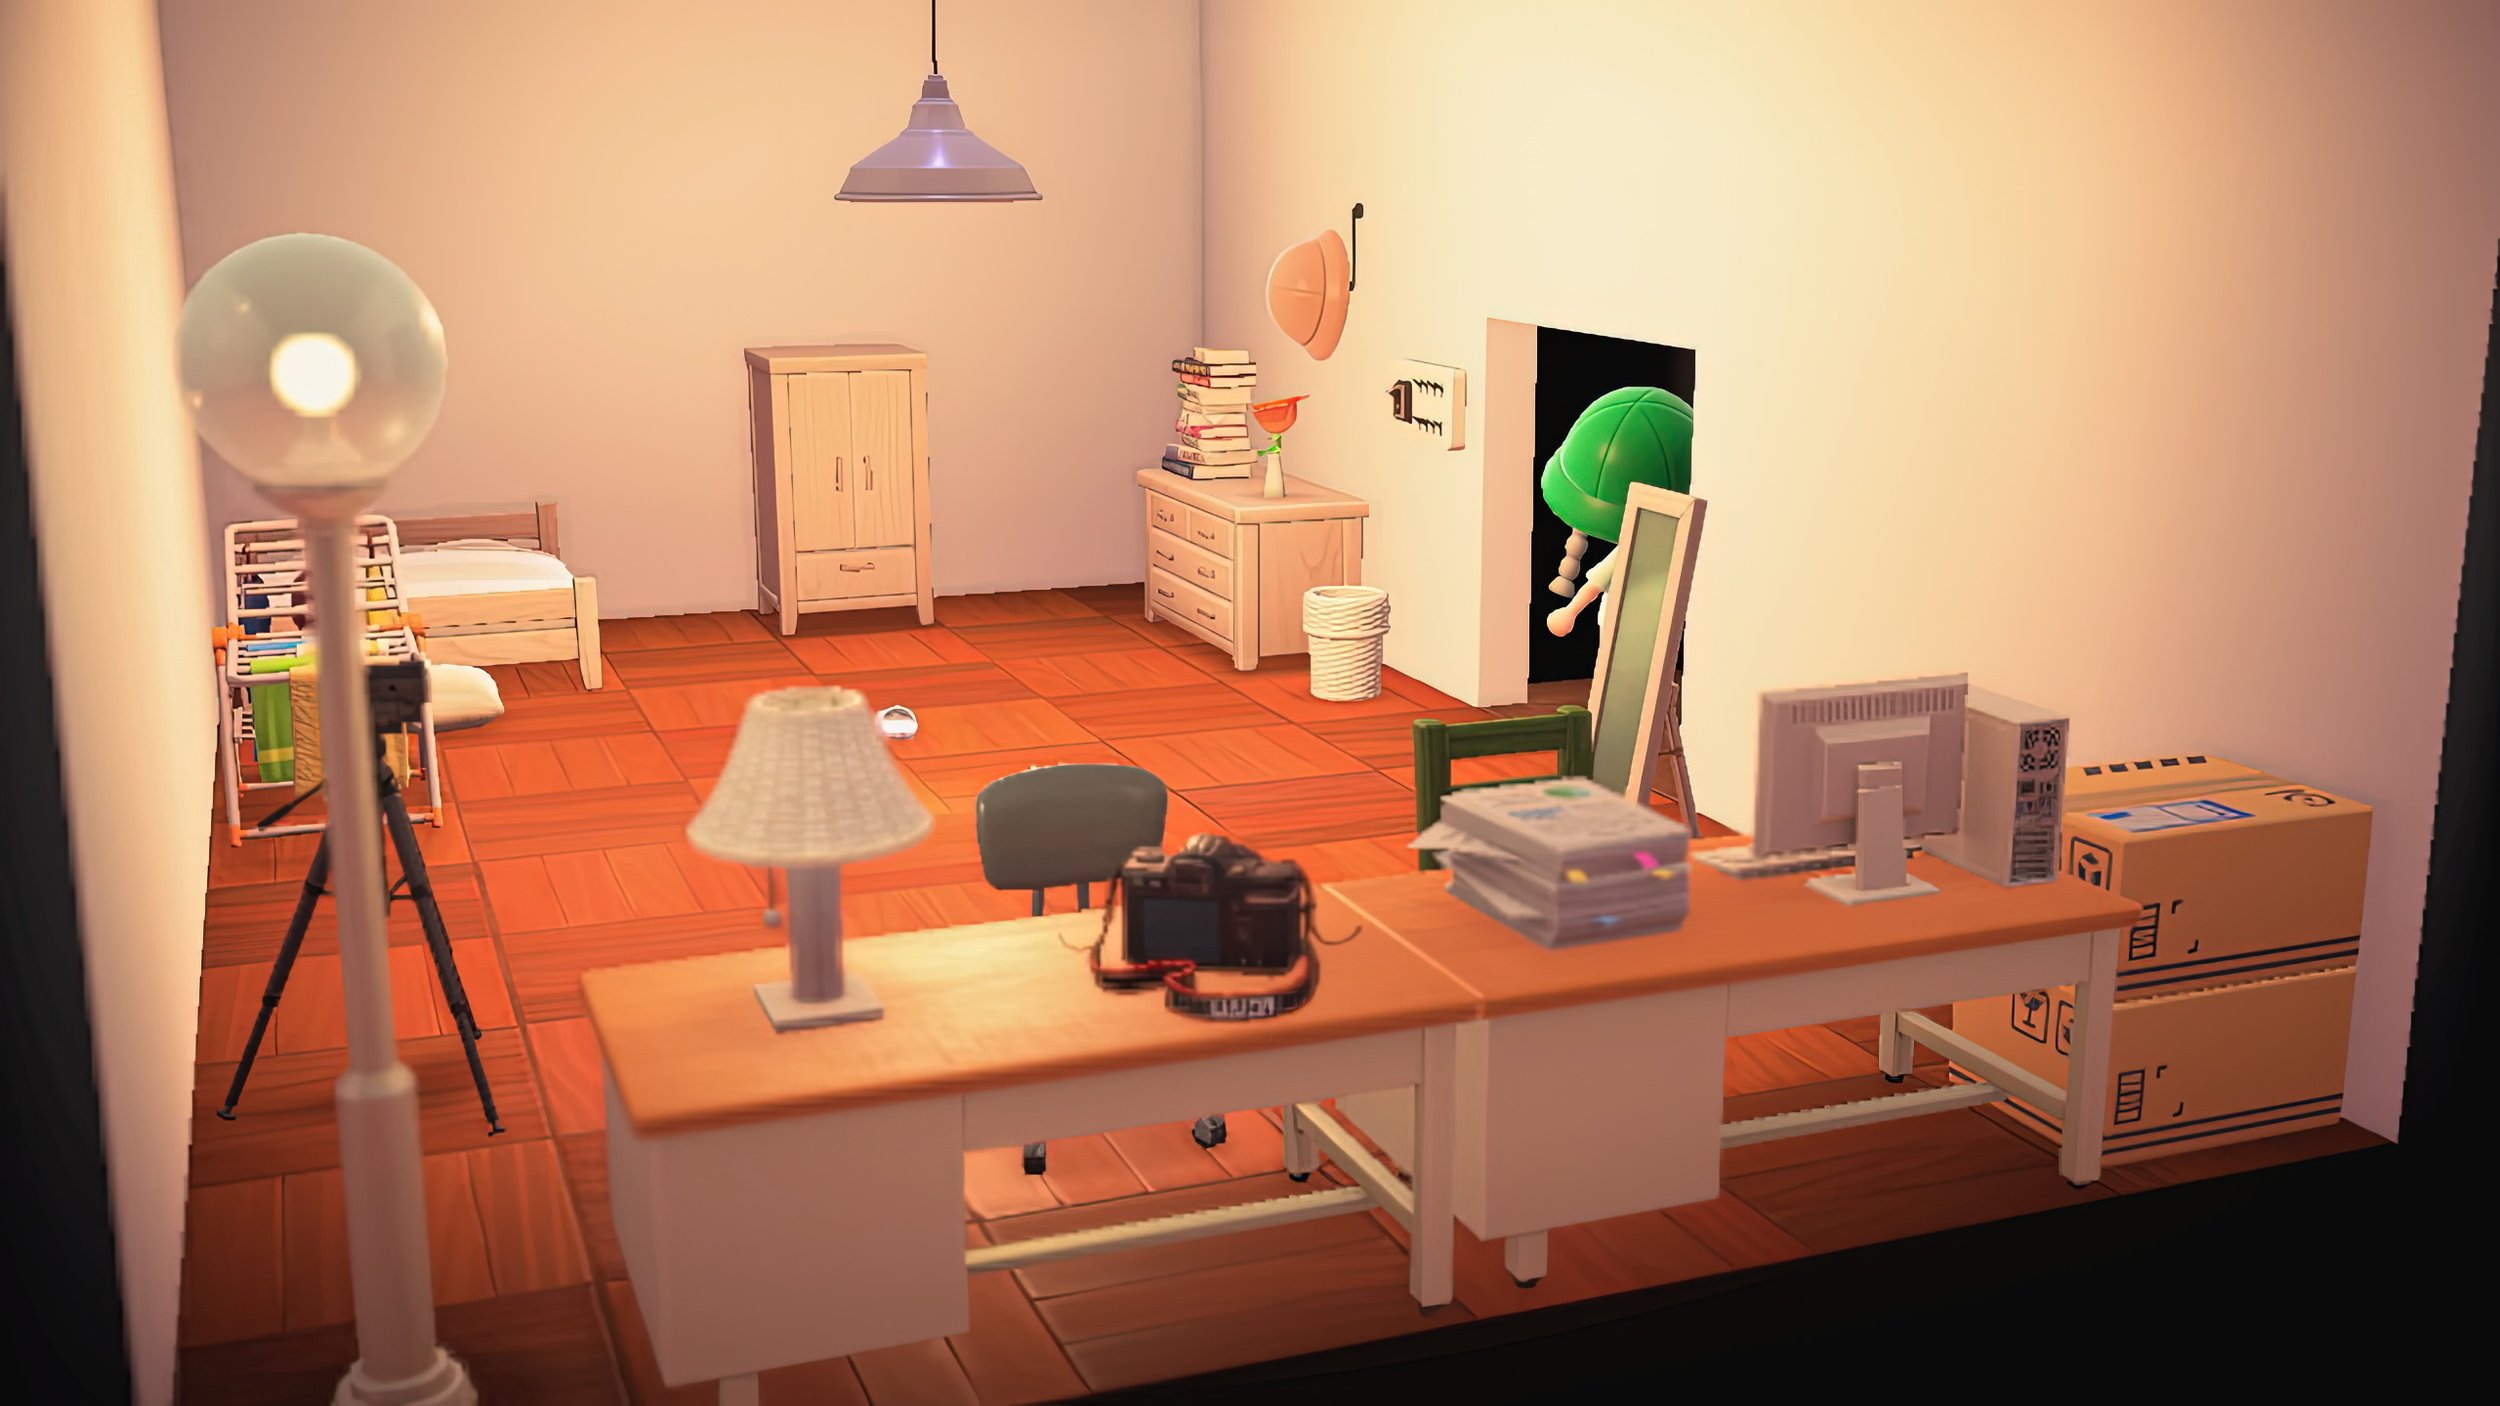  Fumi Omori,  Home Sweet Home,  Lausanne, made with(in)  Animal Crossing: New Horizons , 2022, screenshot. 